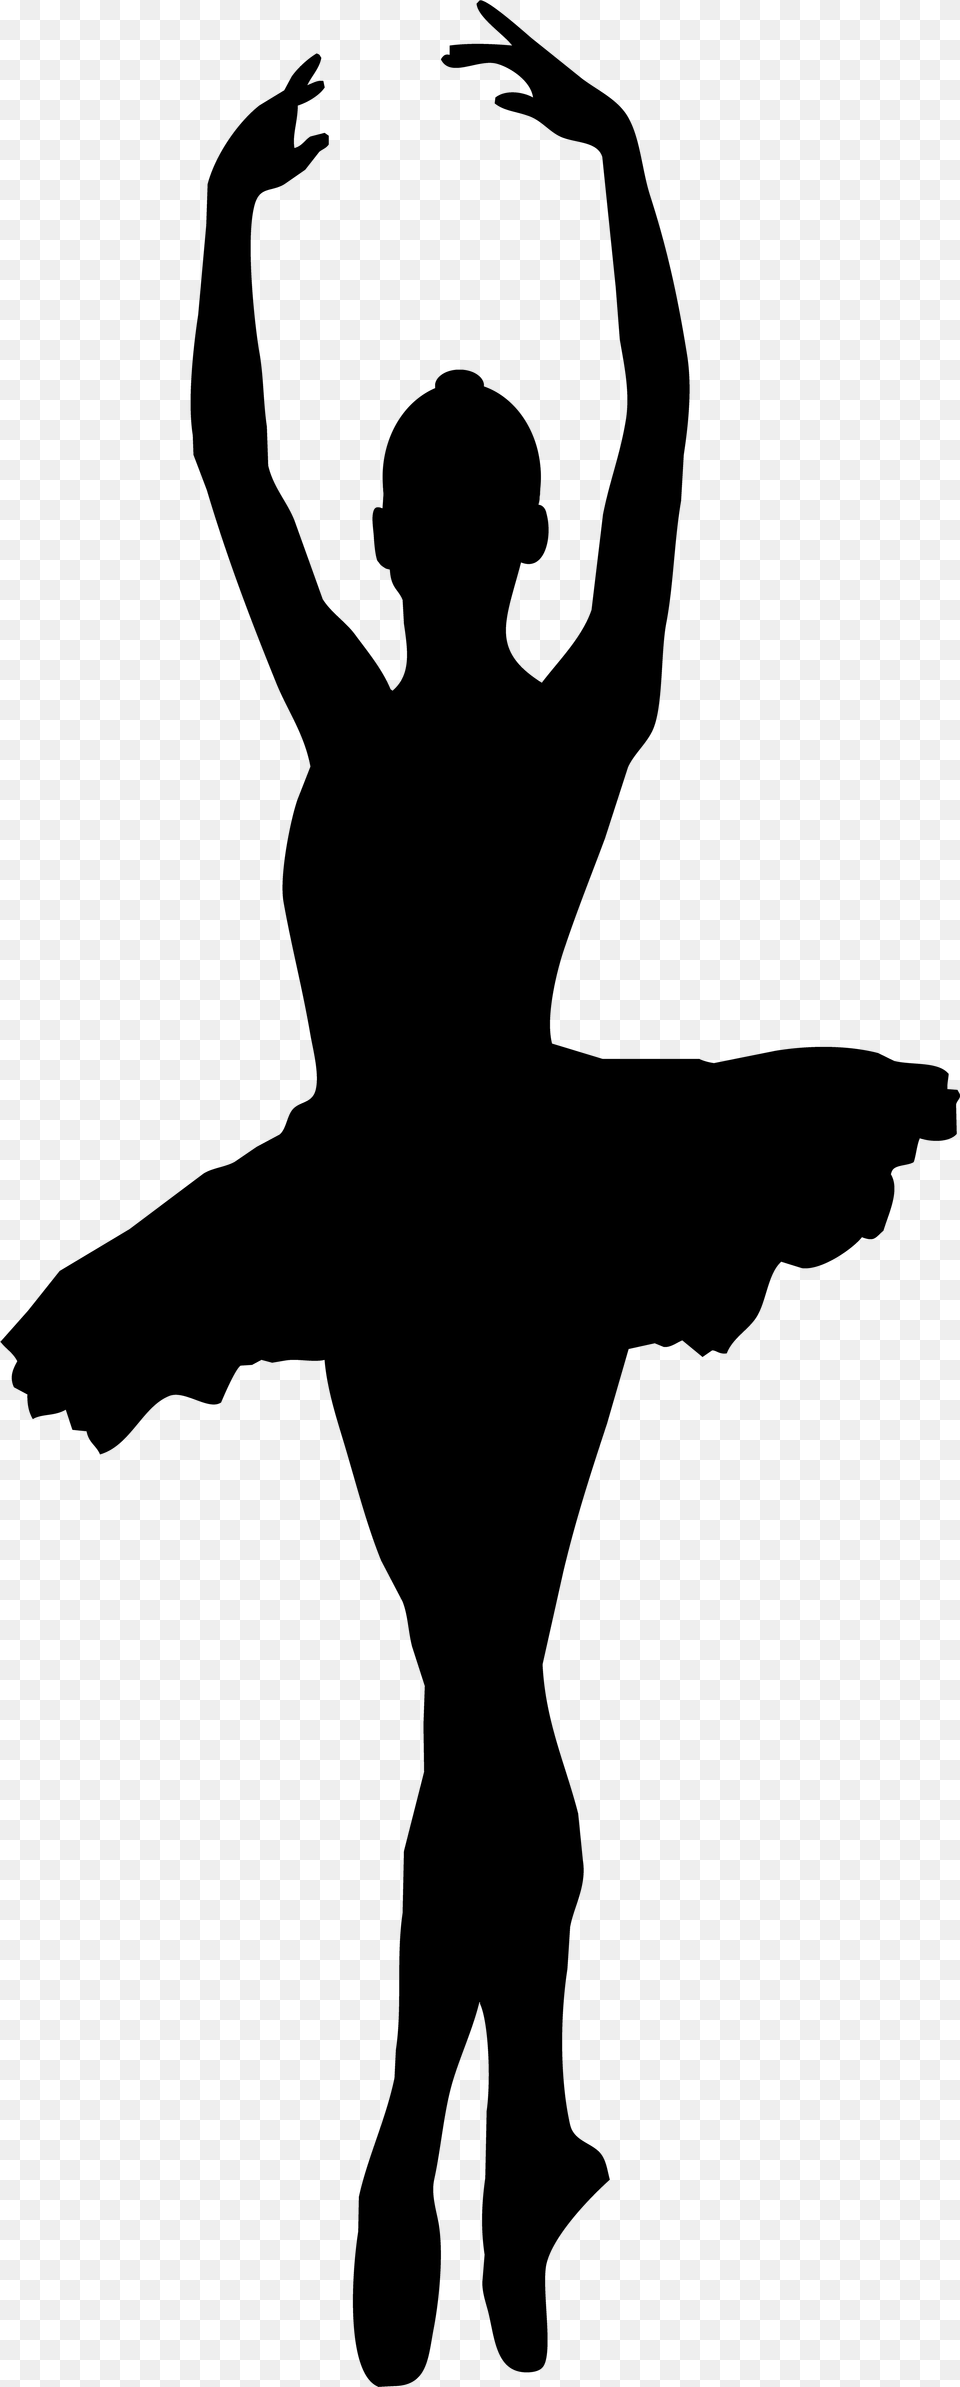 Ballerina Silhouette Transparent Background, Gray Png